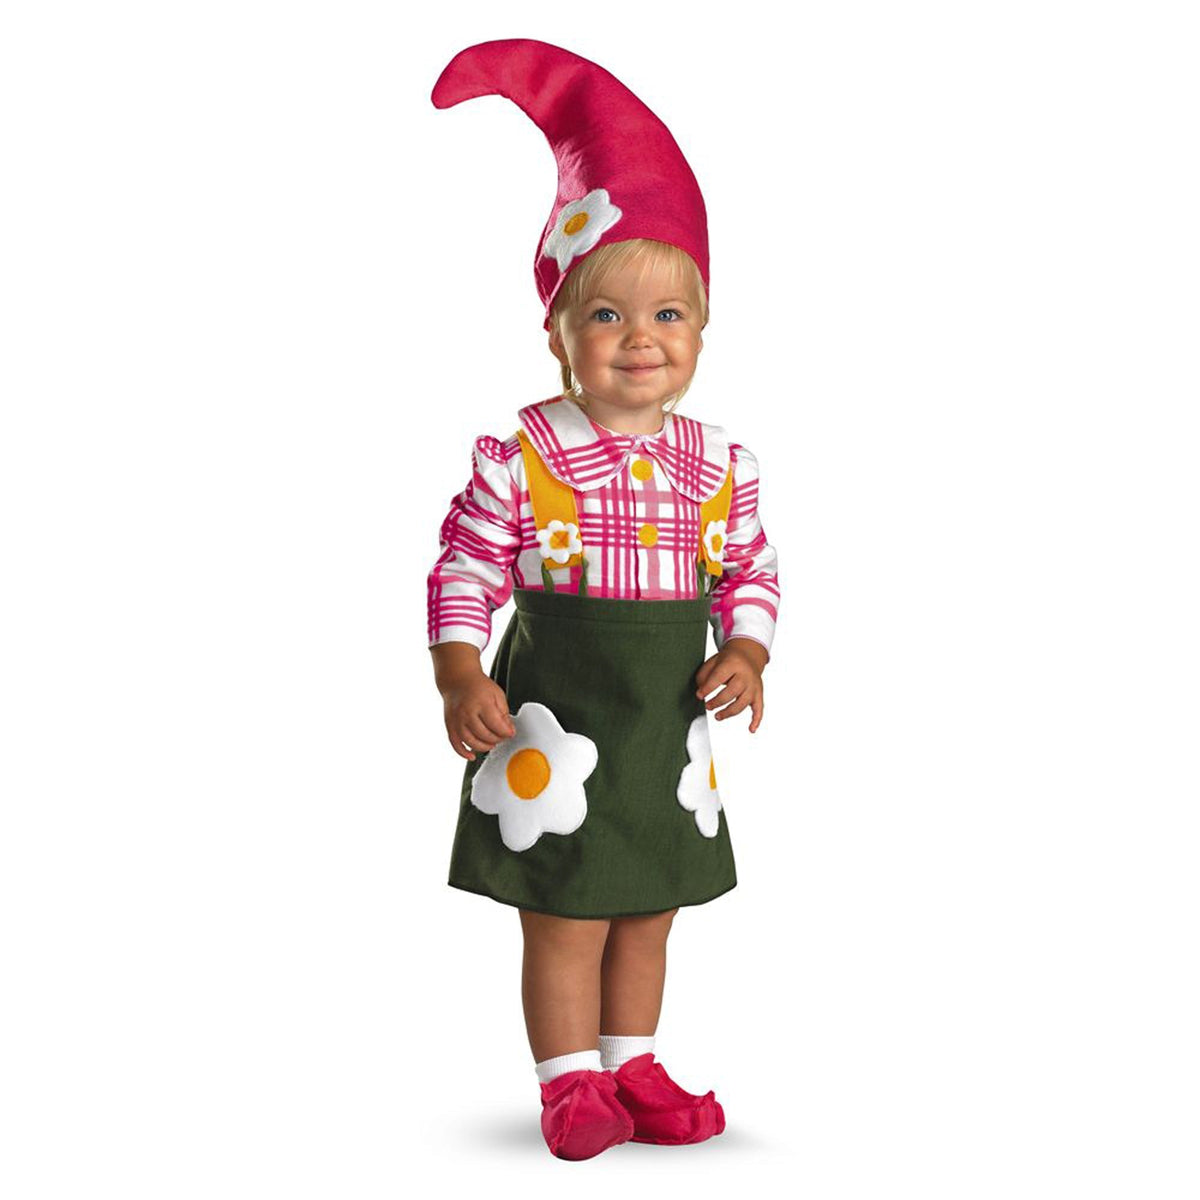 DISGUISE (TOY-SPORT) Costumes Flower Garden Gnome Costume for Kids, Green and Pink Dress